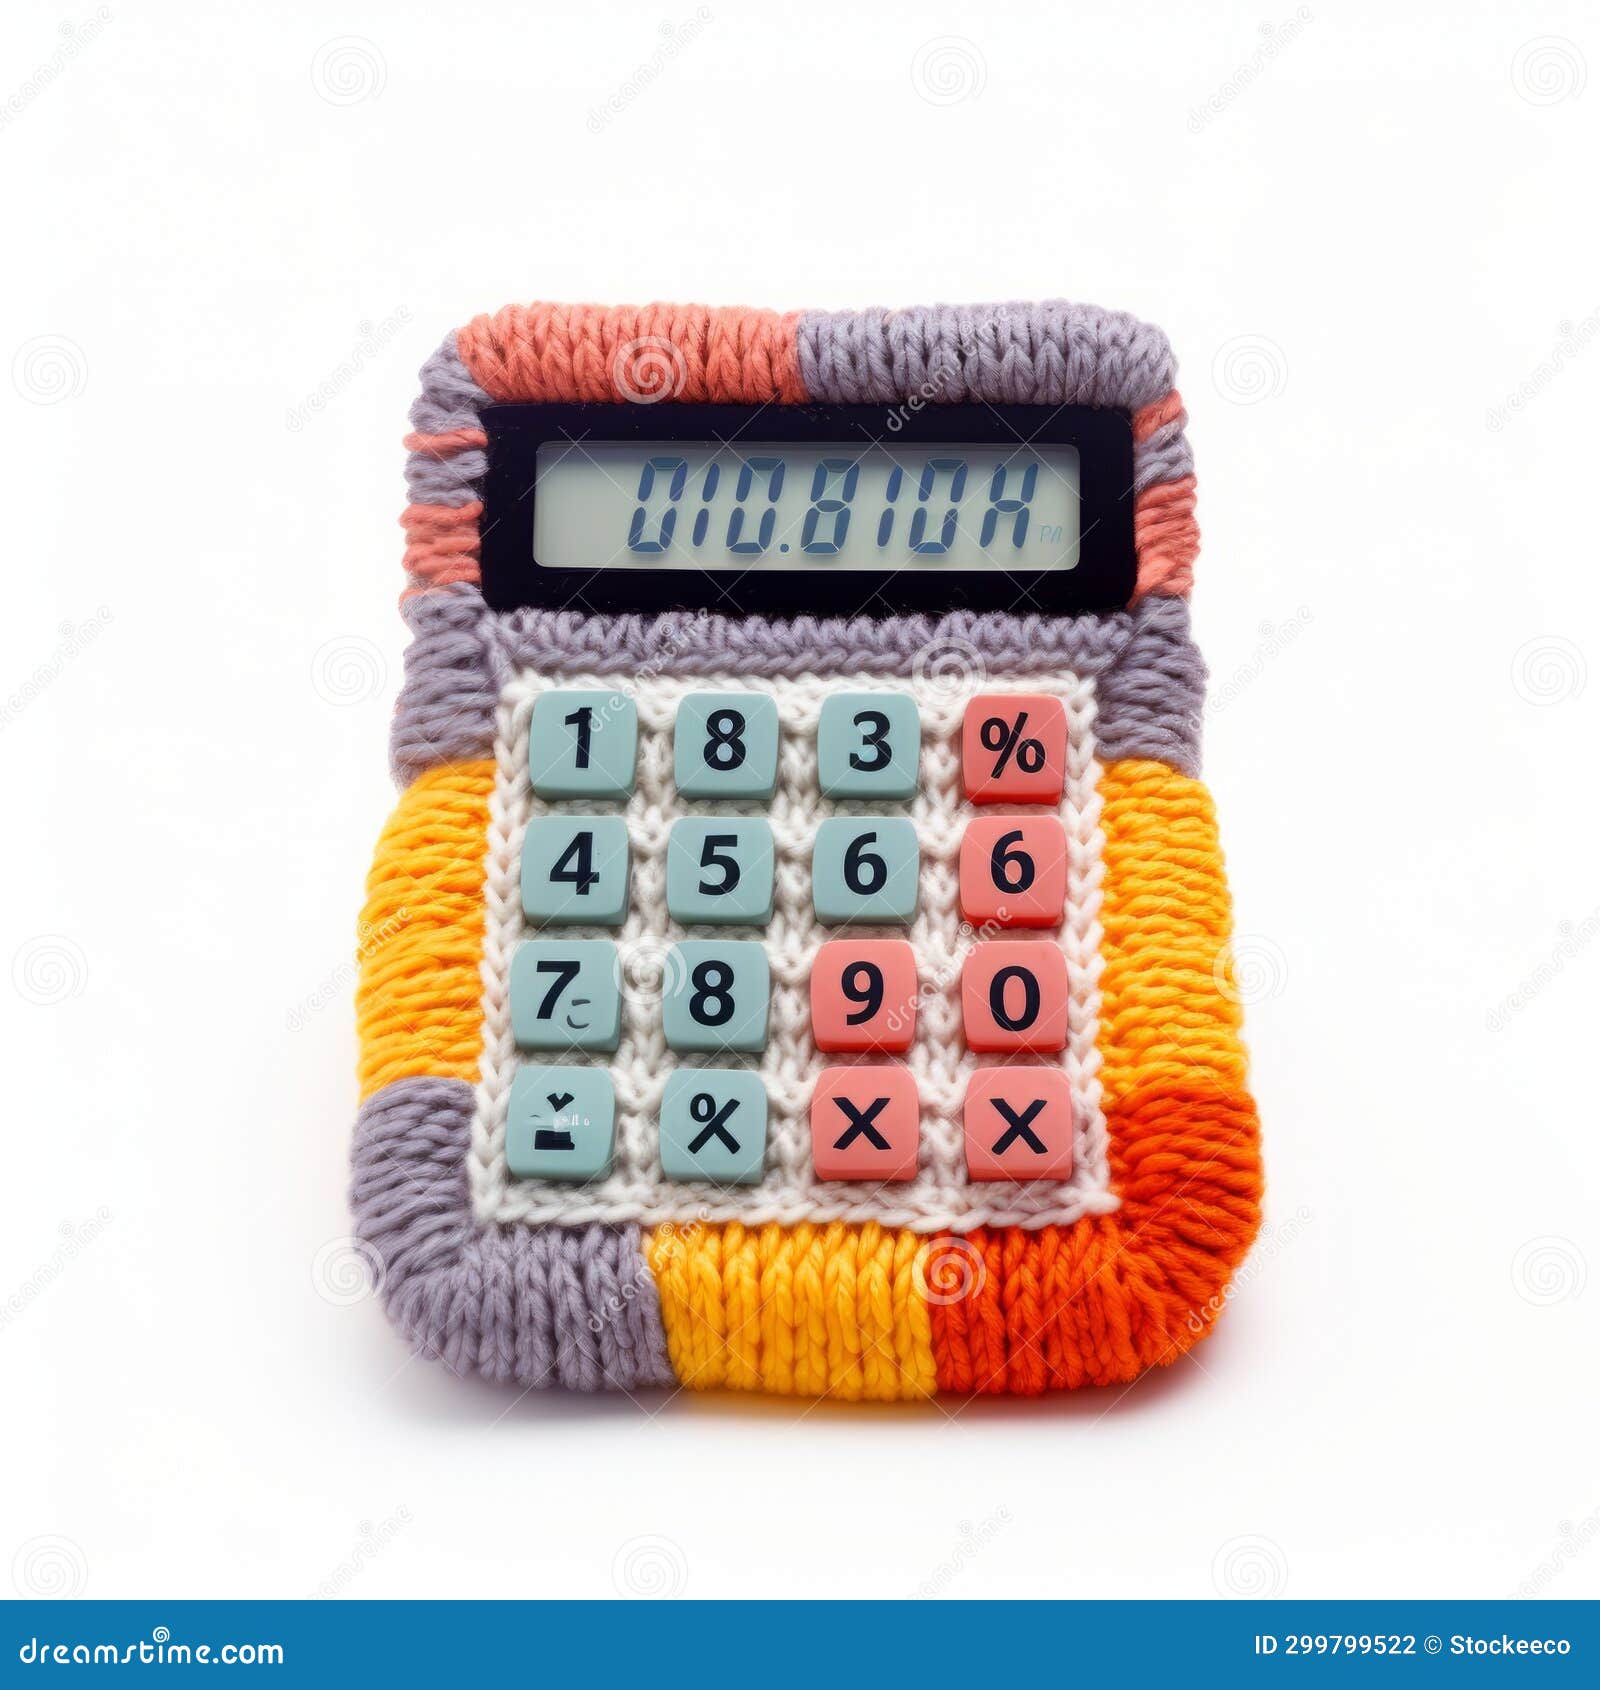 crochet calculator: a unique tool for crafting enthusiasts